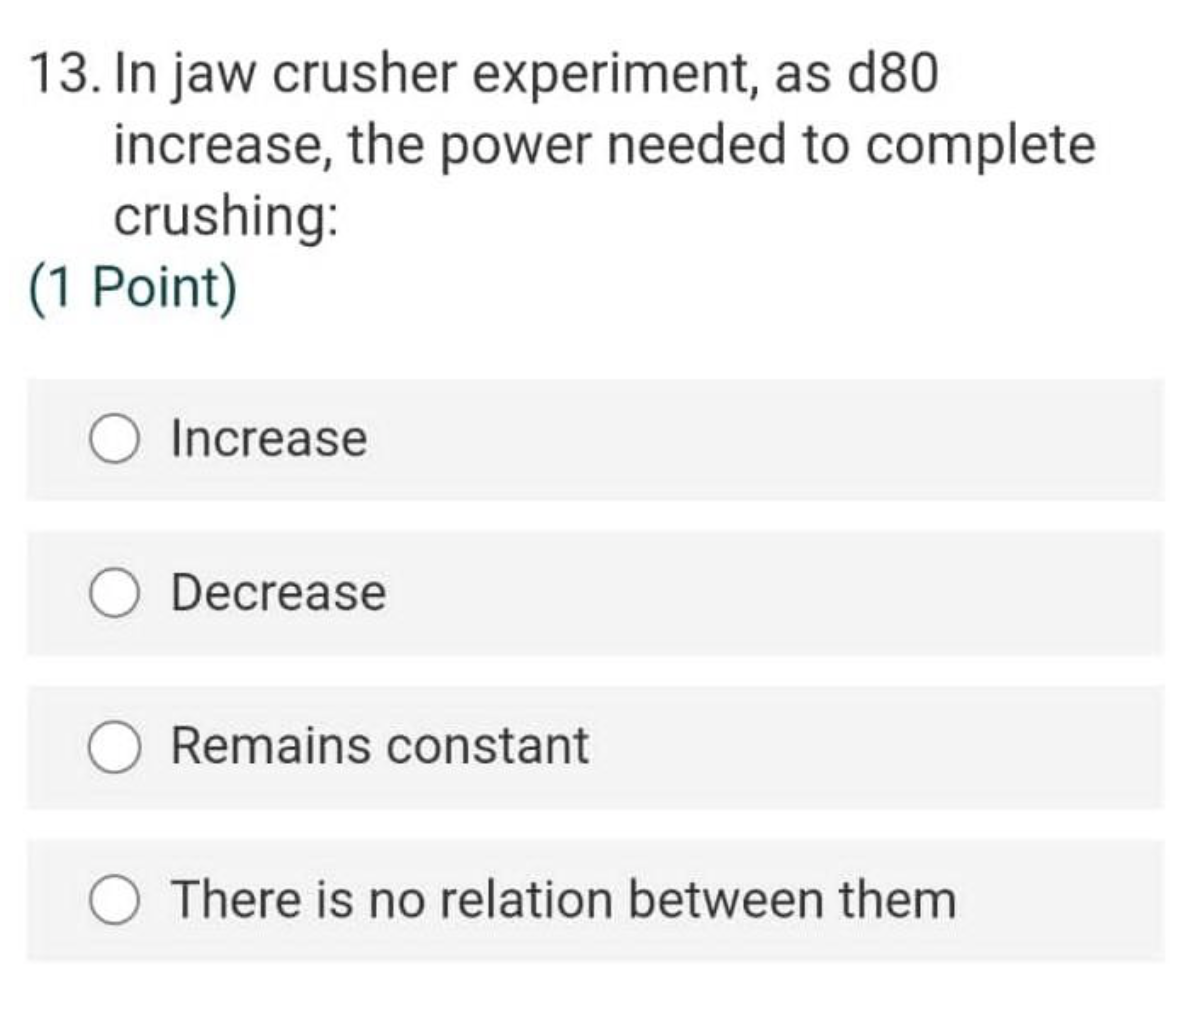 13. In jaw crusher experiment, as d80
increase, the power needed to complete
crushing:
(1 Point)
Increase
Decrease
Remains constant
There is no relation between them
